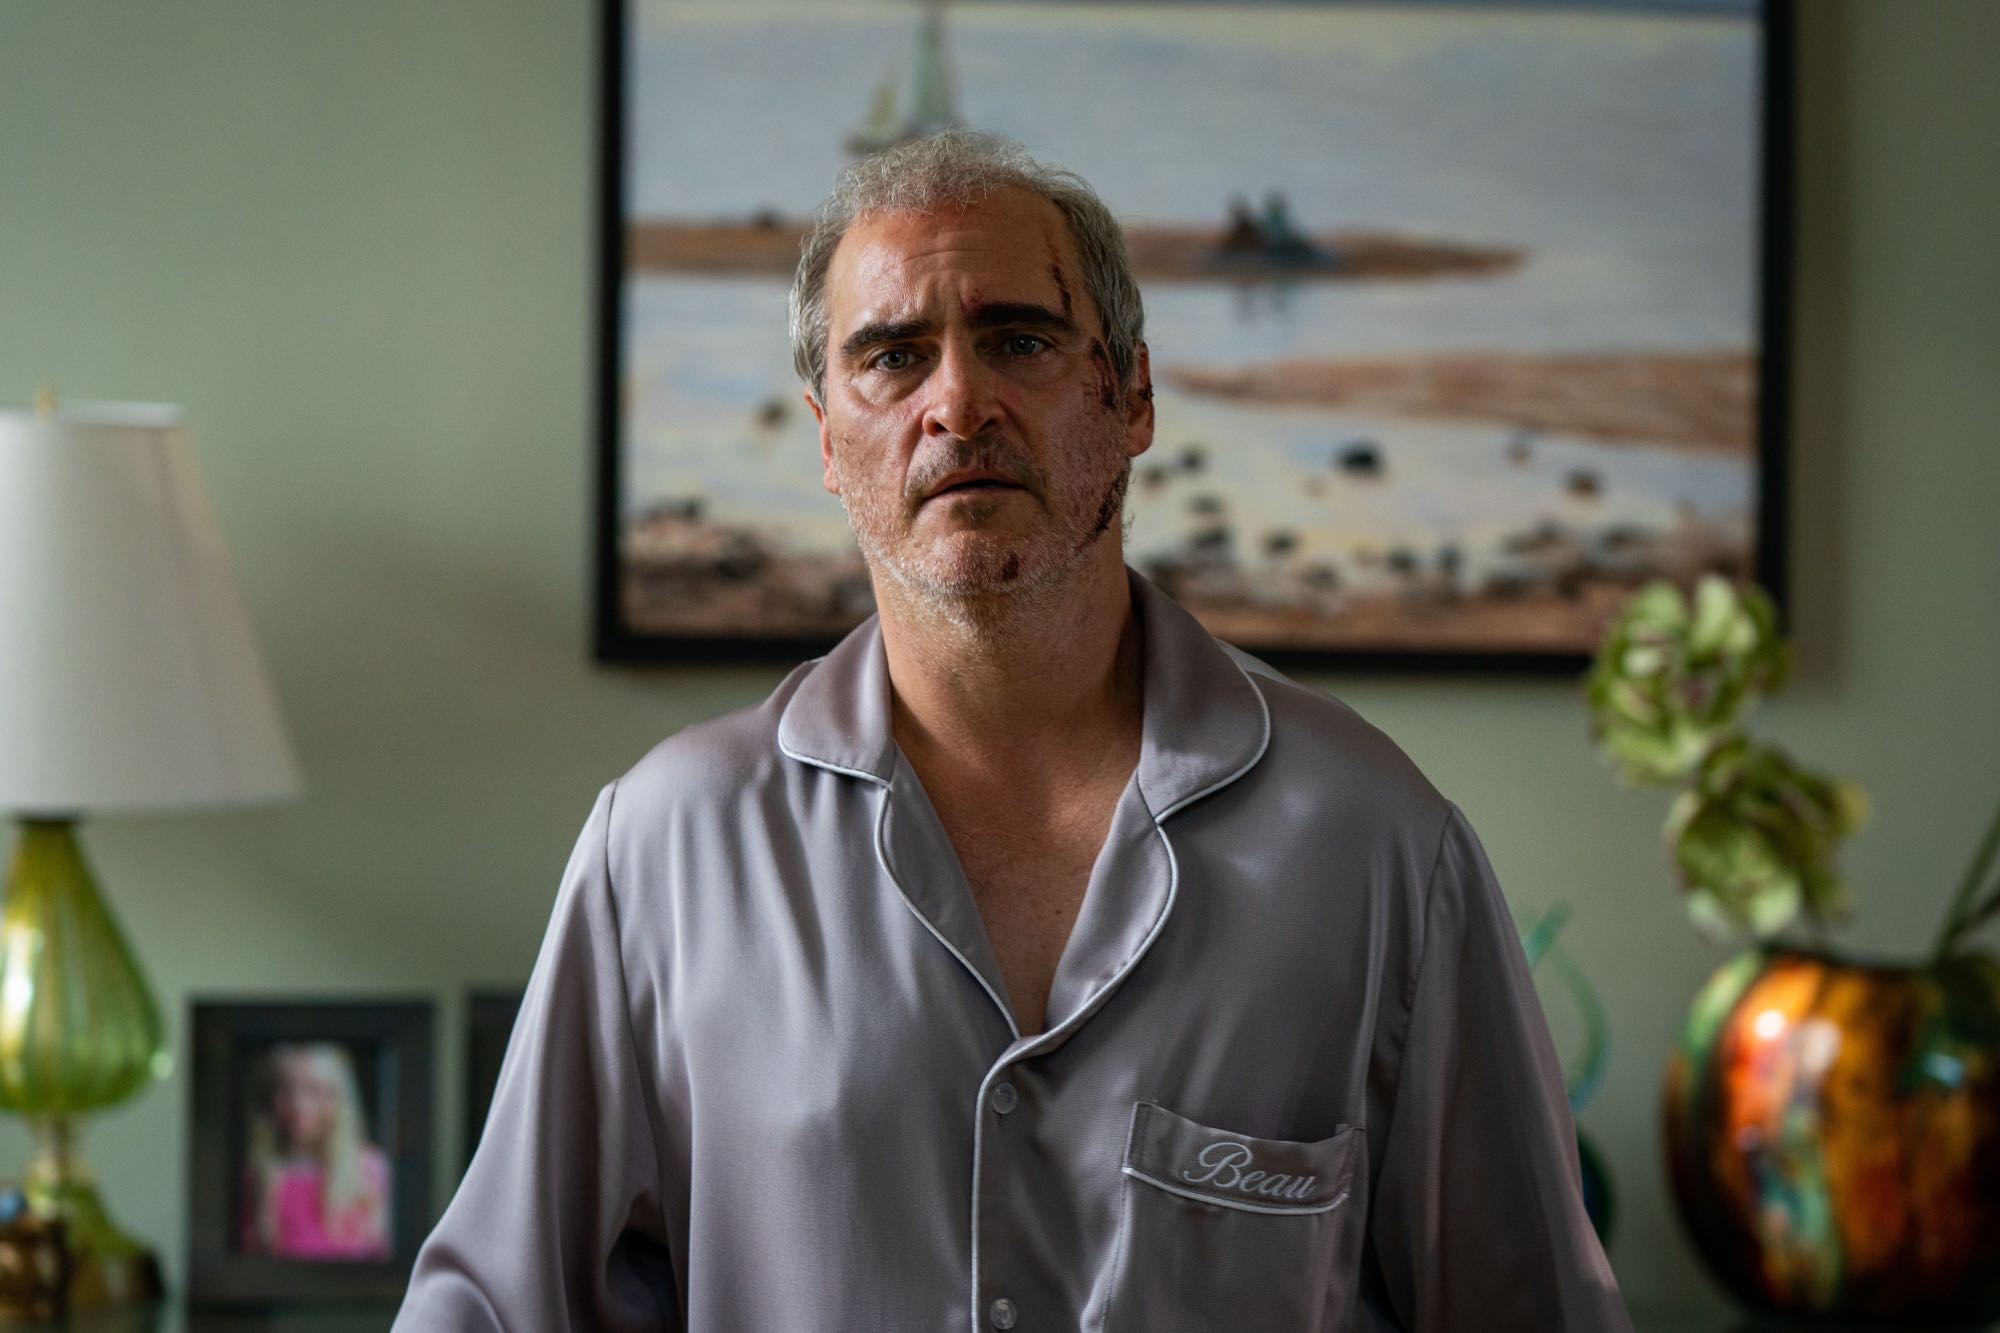 'Beau Is Afraid' Joaquin Phoenix as Beau looking worried, while wearing pajamas. A painting is on the wall behind him.